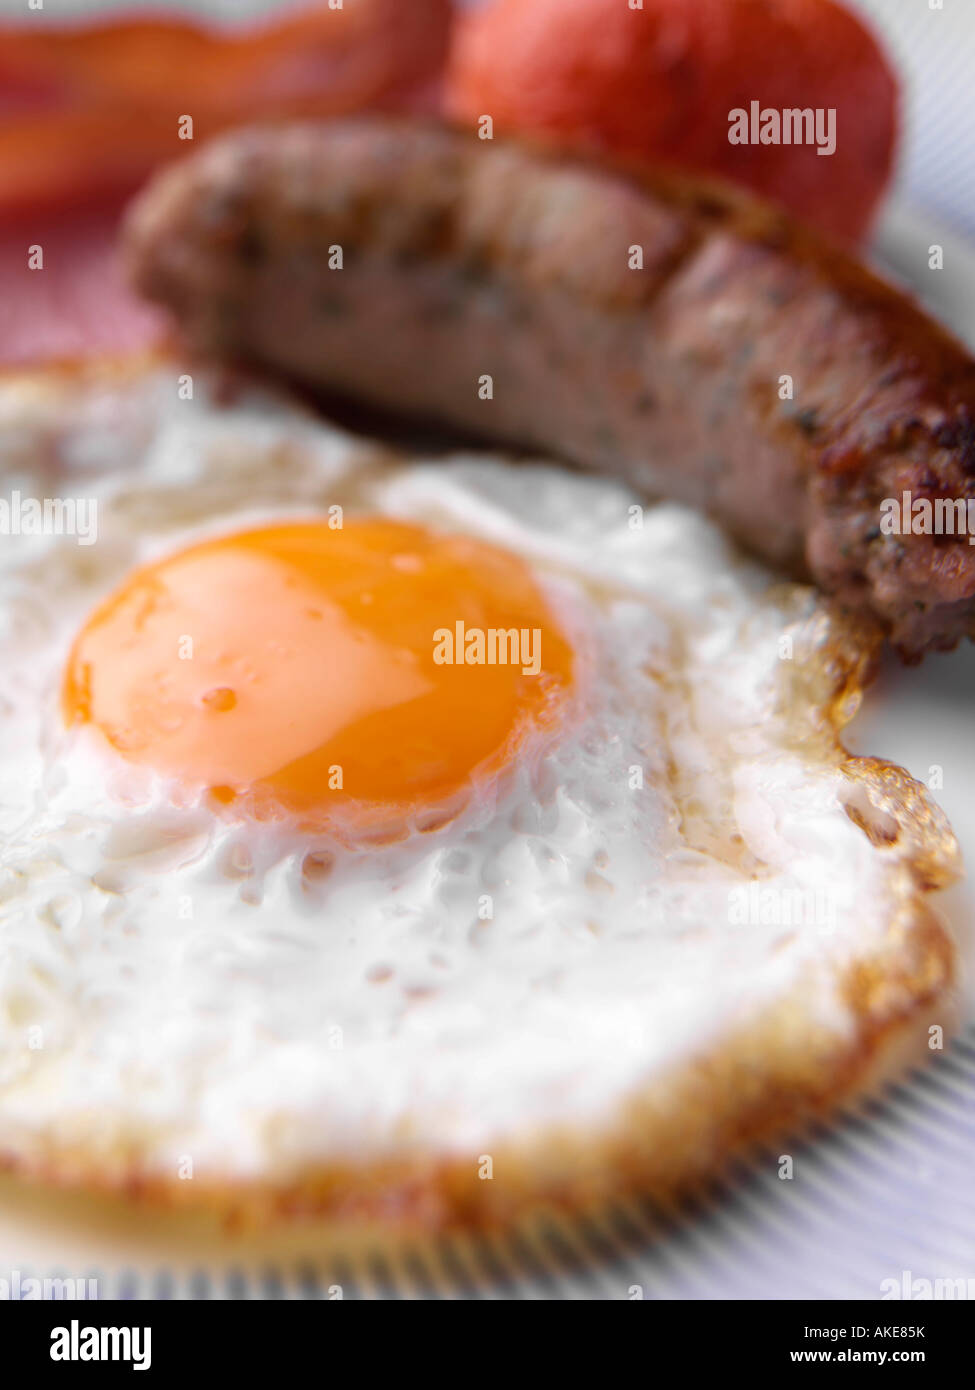 A full cooked English breakfast close up editorial food Stock Photo